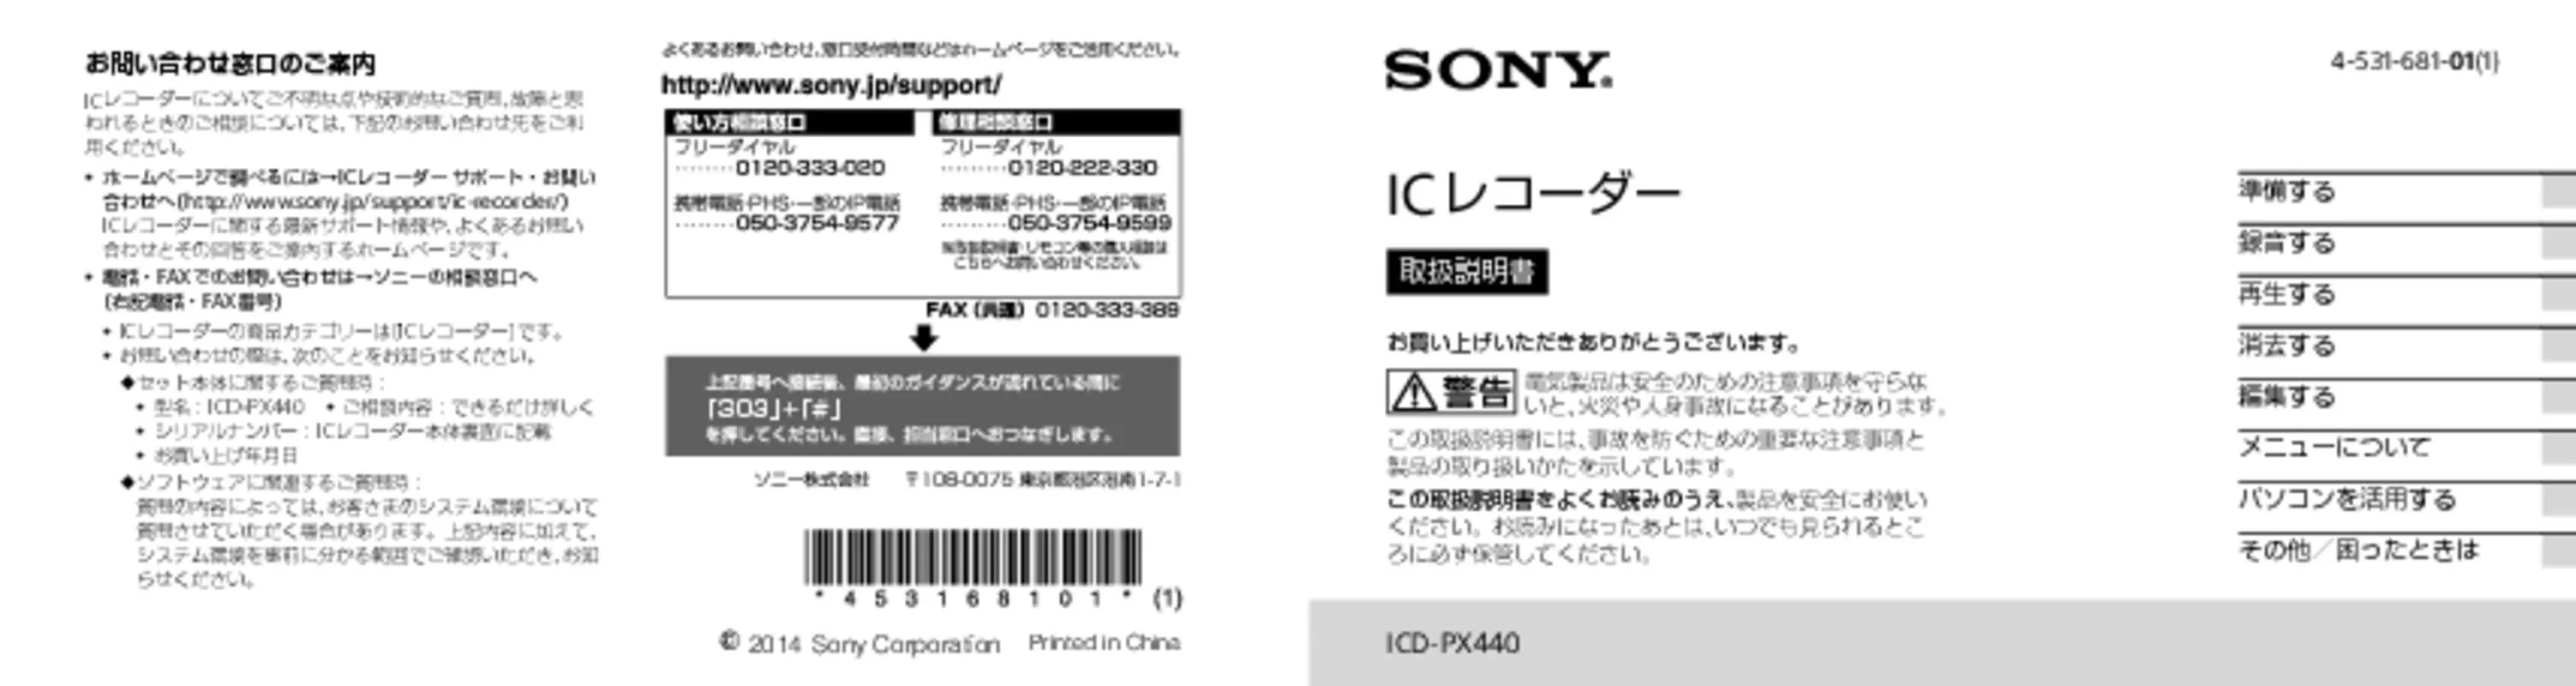 Mode d'emploi SONY ICD-PX440